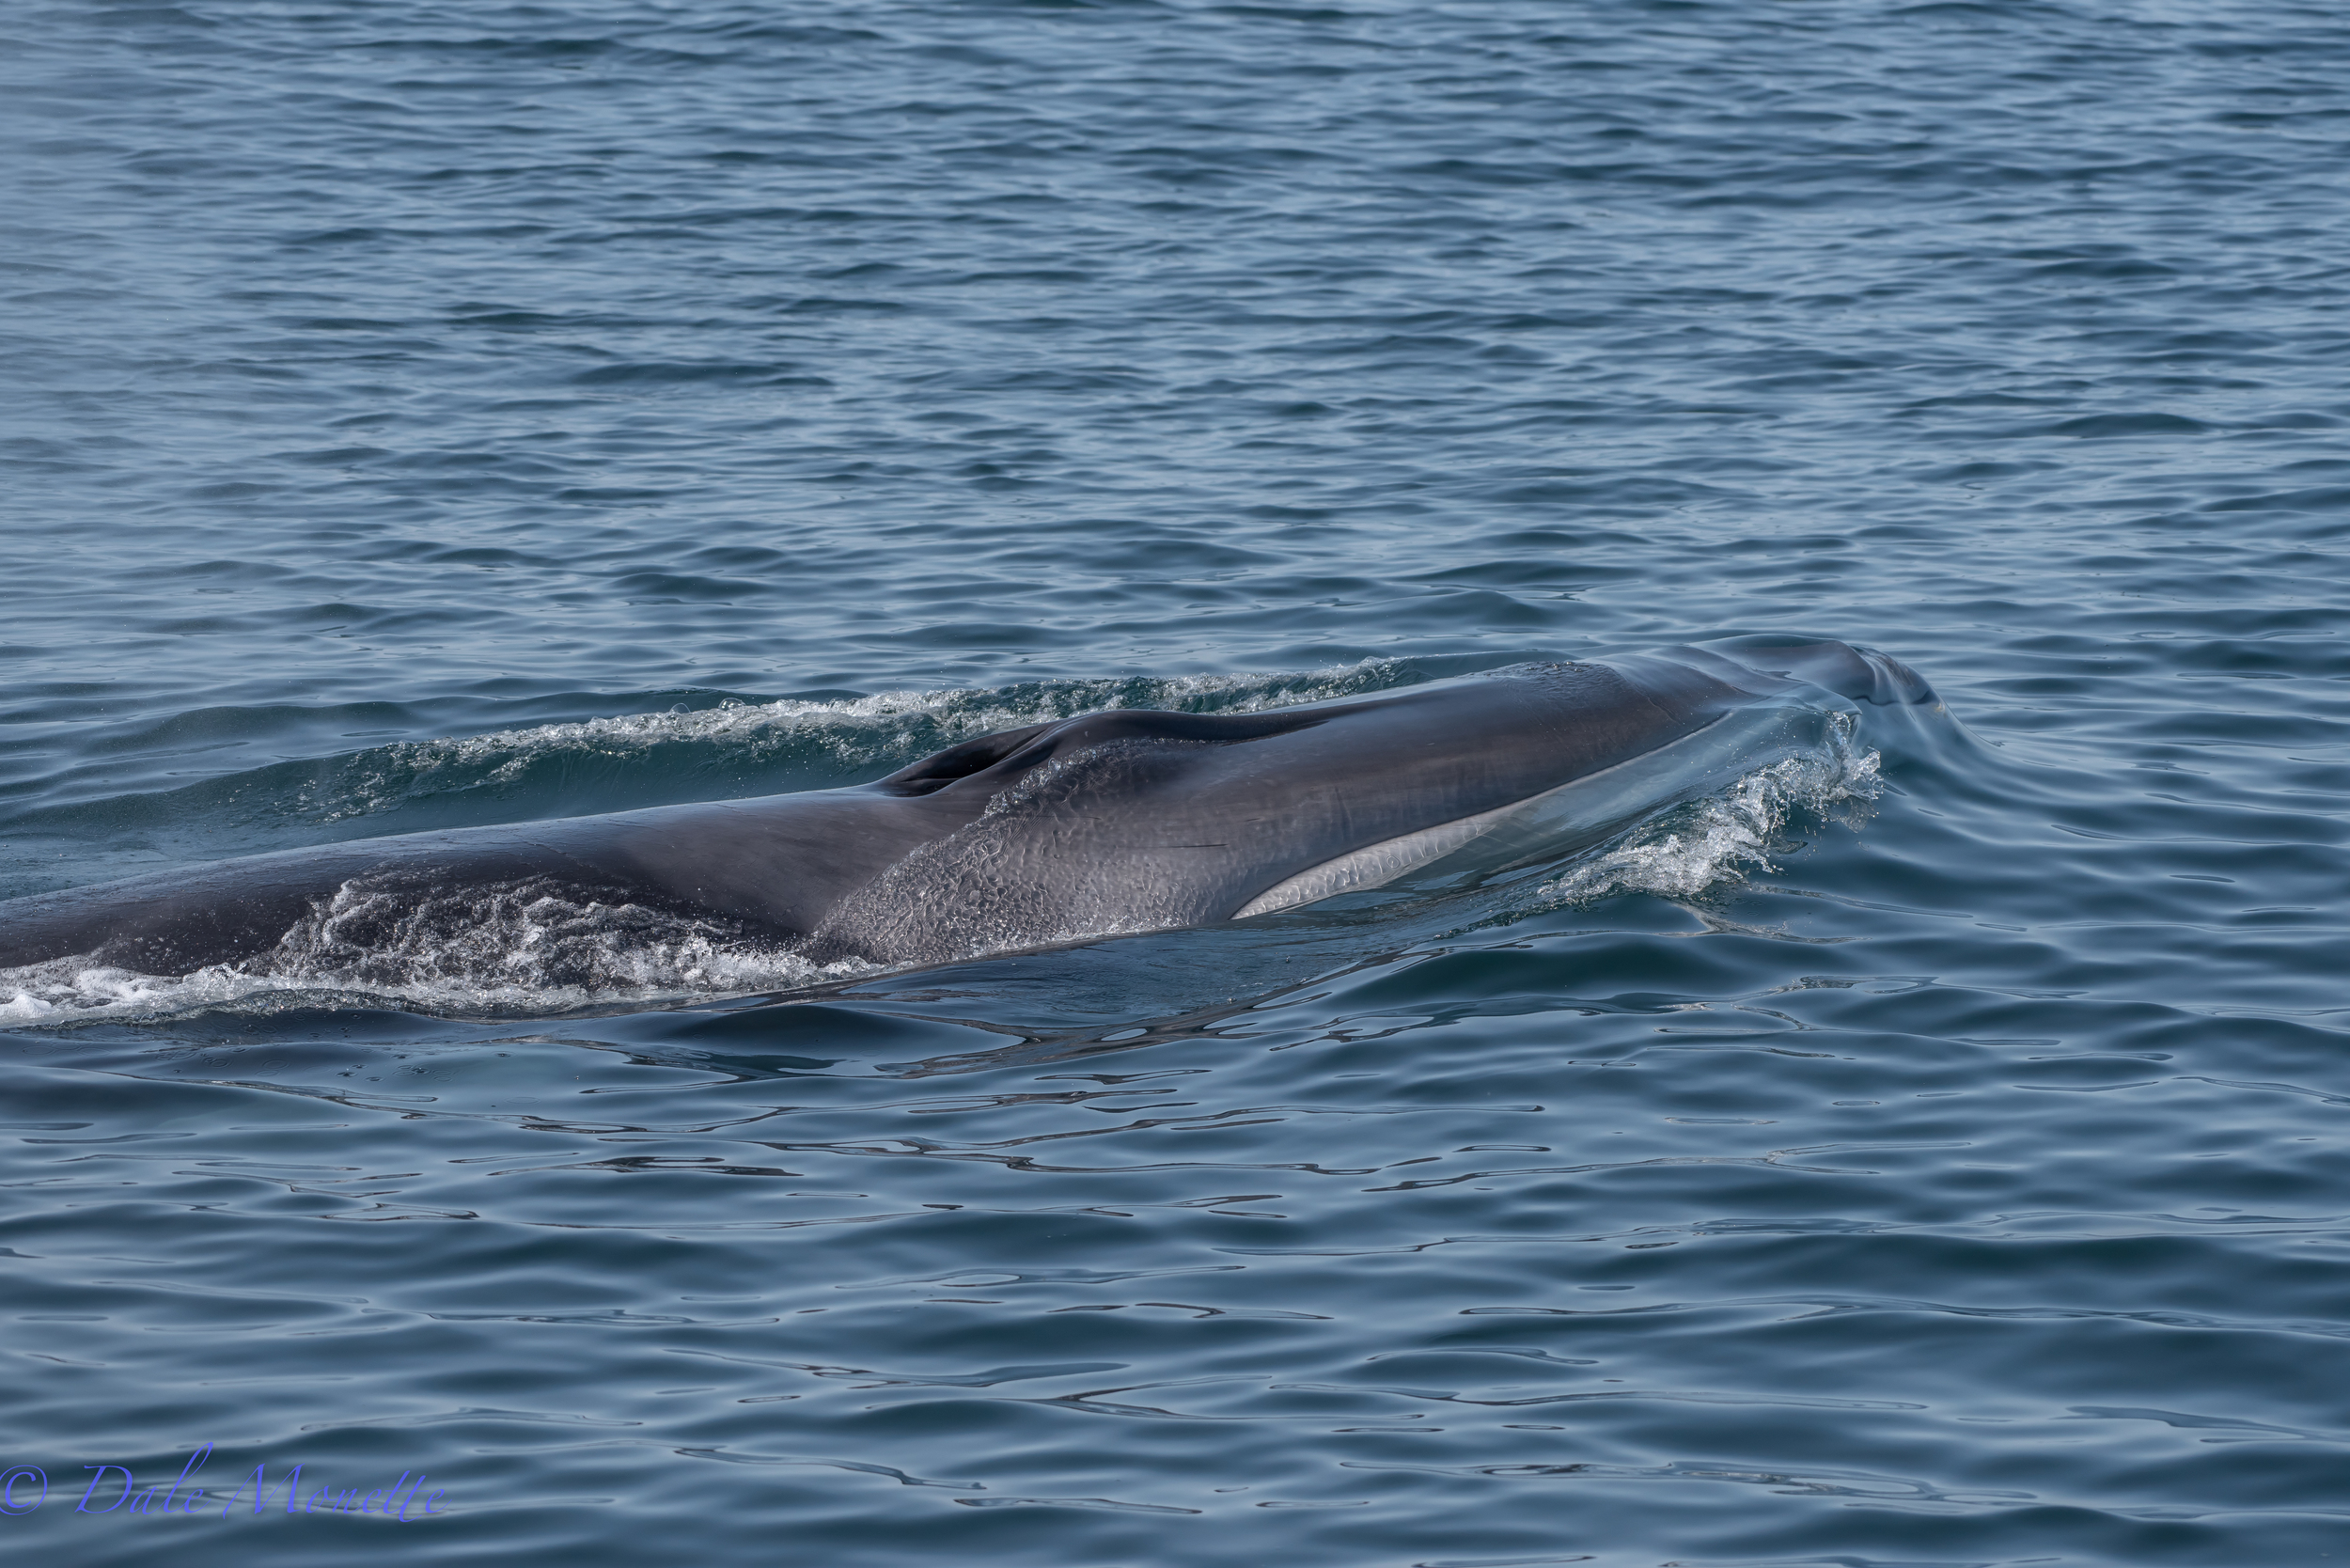    This is a Fin Whale found on yesterdays trip. They are the second largest living things on earth. They grow to be 70 feet long and weighs 80 tons. They live up to 100 years. They are swift and called the greyhounds of the sea. This one was found 3